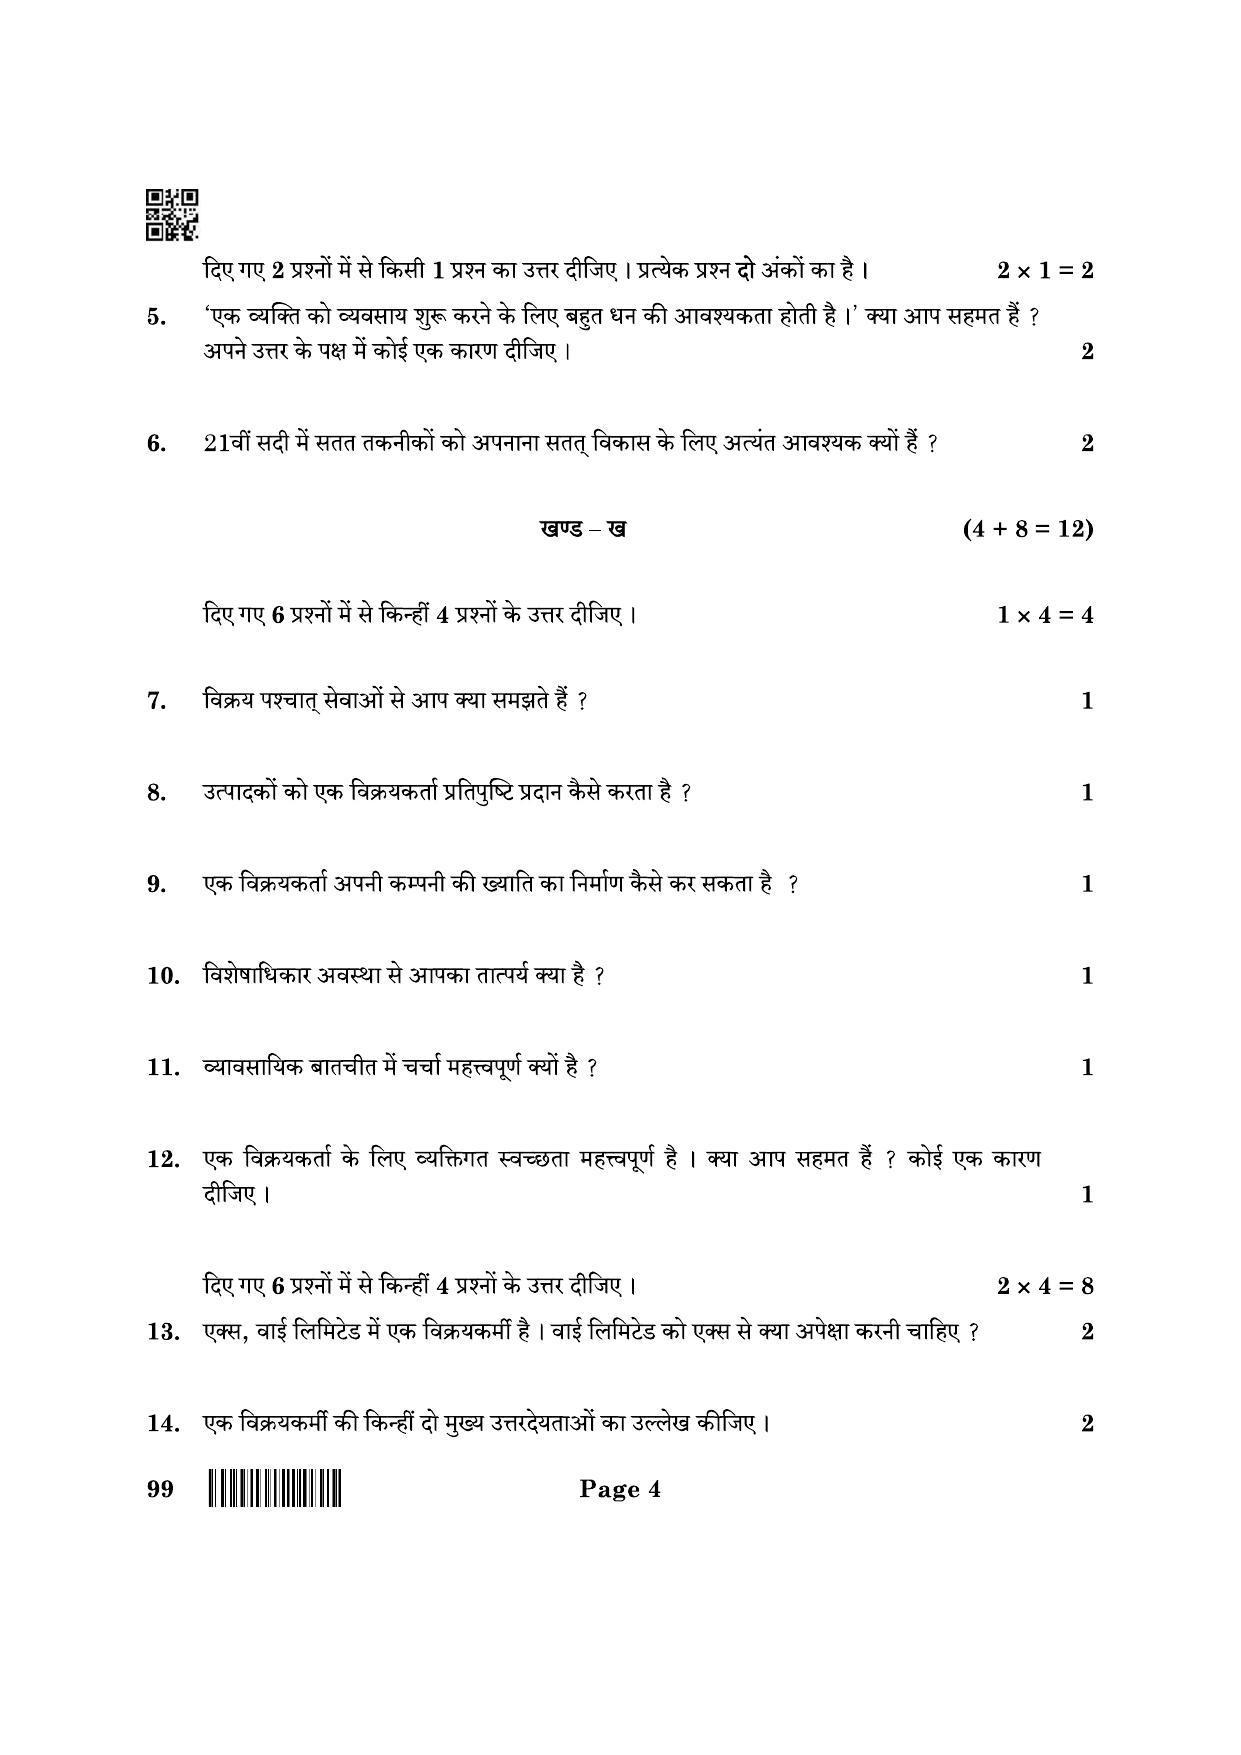 CBSE Class 10 99 Marketing And Sales 2022 Question Paper - Page 4